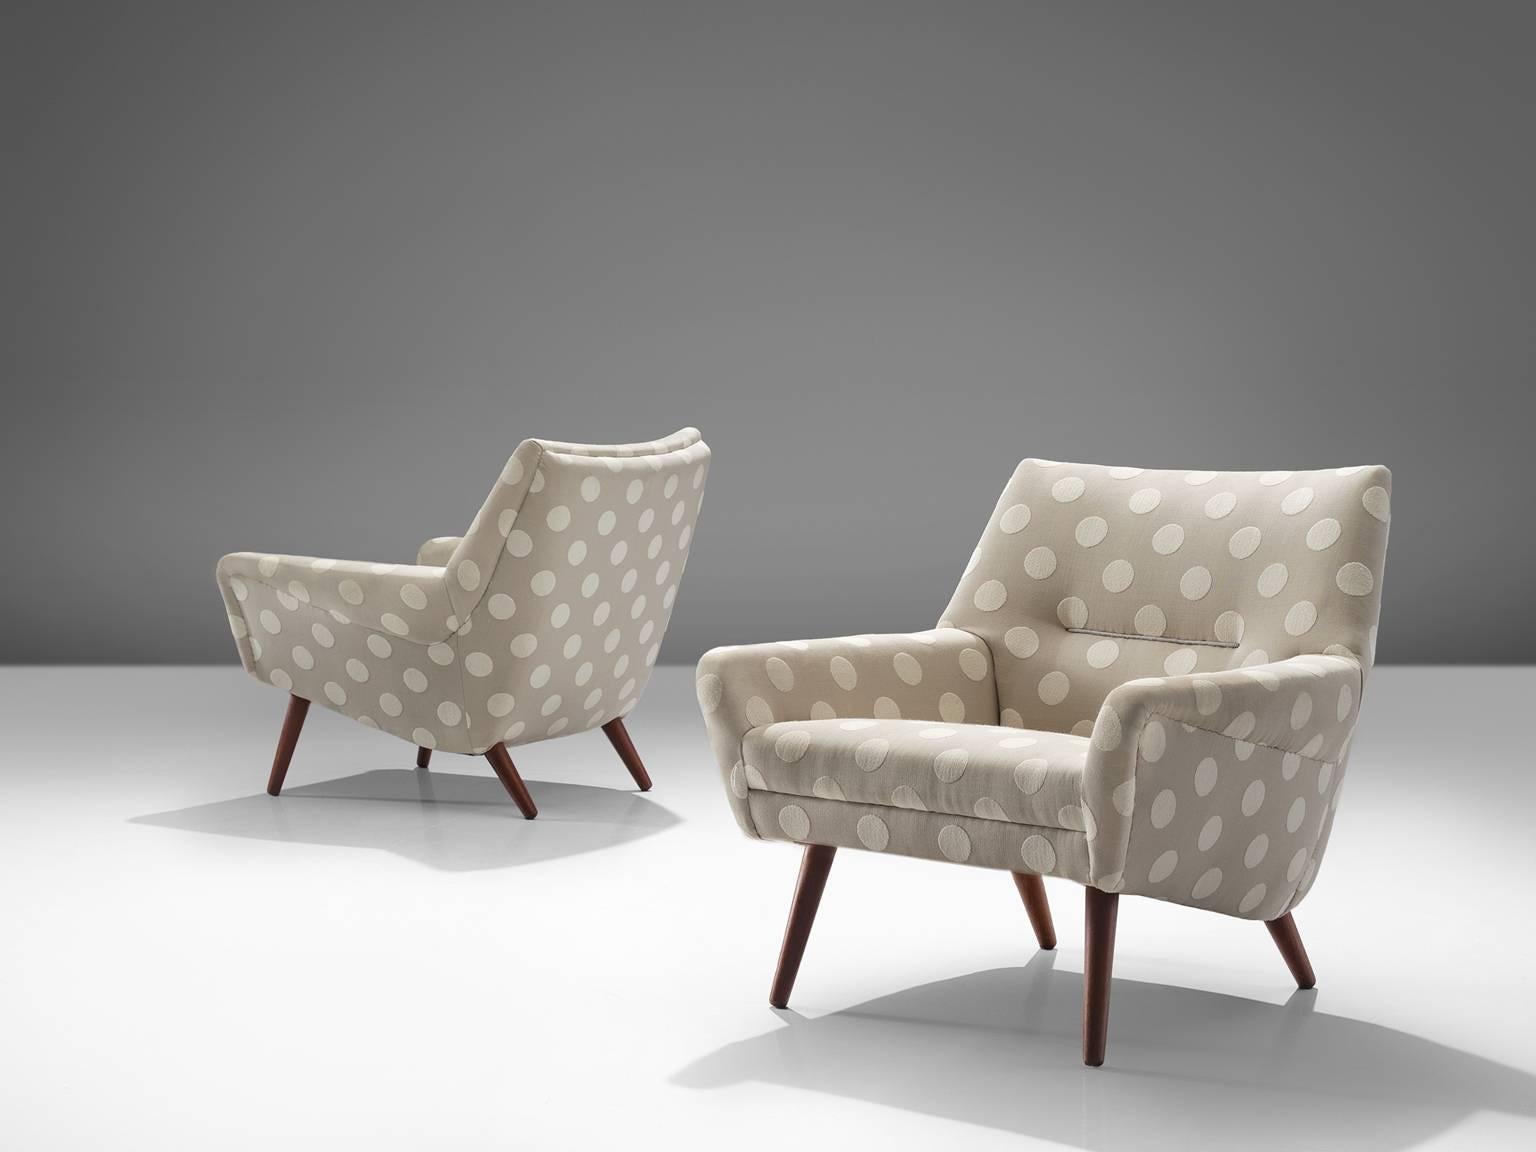 Easy chairs, grey and white dotted fabric, teak, Denmark, 1960s.

These armchairs show refined Danish craftsmanship and aesthetics. The backs feature a slightly tilted back and comfortable cushions in both the seat and back, as can be expected